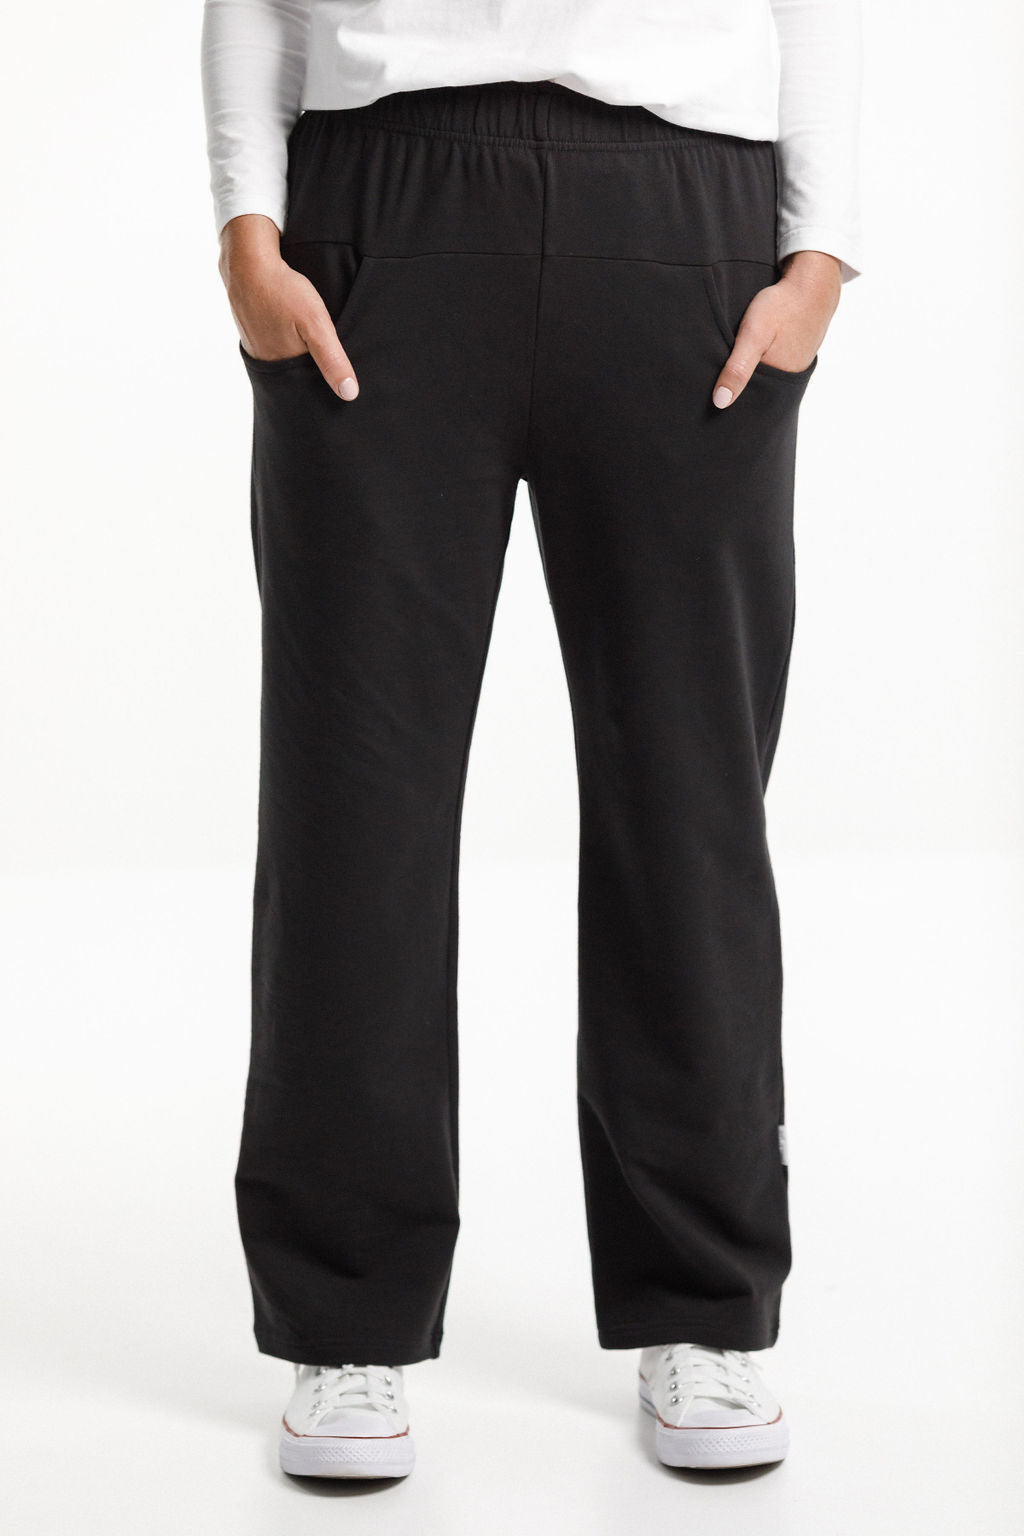 Home-Lee - Avenue Pant Wide Leg - Black with White Cross HL266